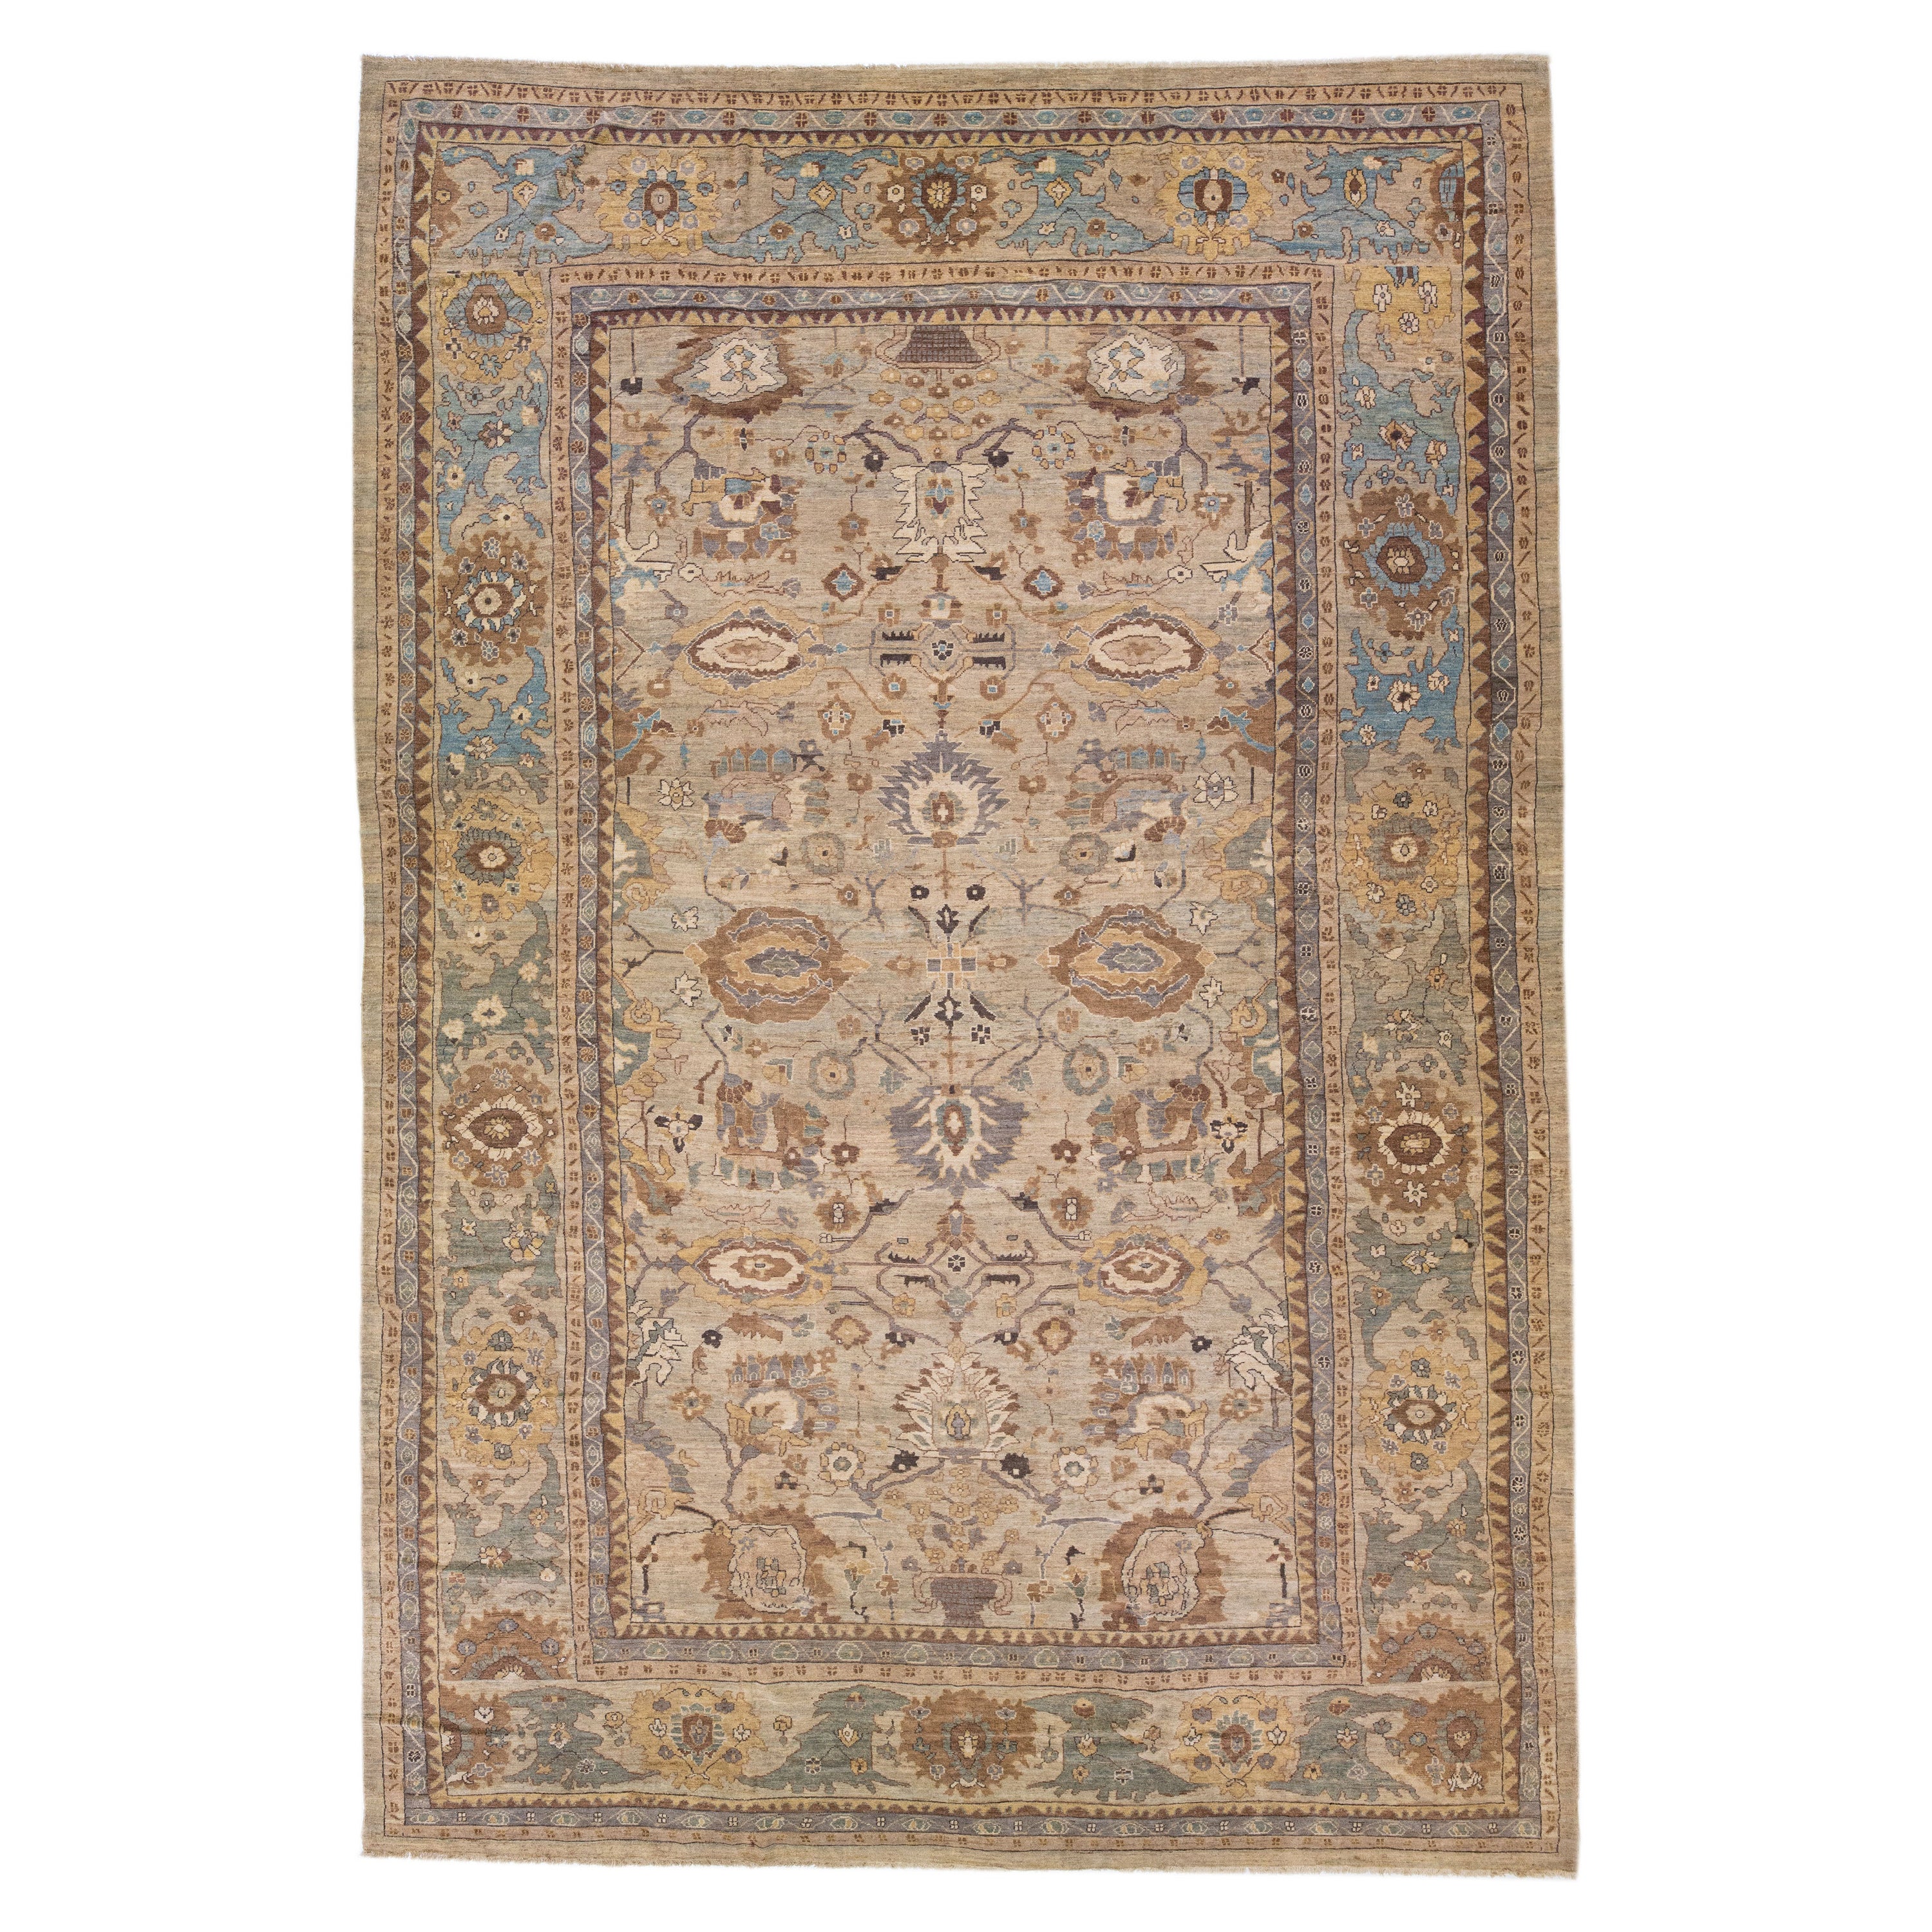 Light Brown Modern Sultanabad Handmade Persian Wool Rug with Floral Motif